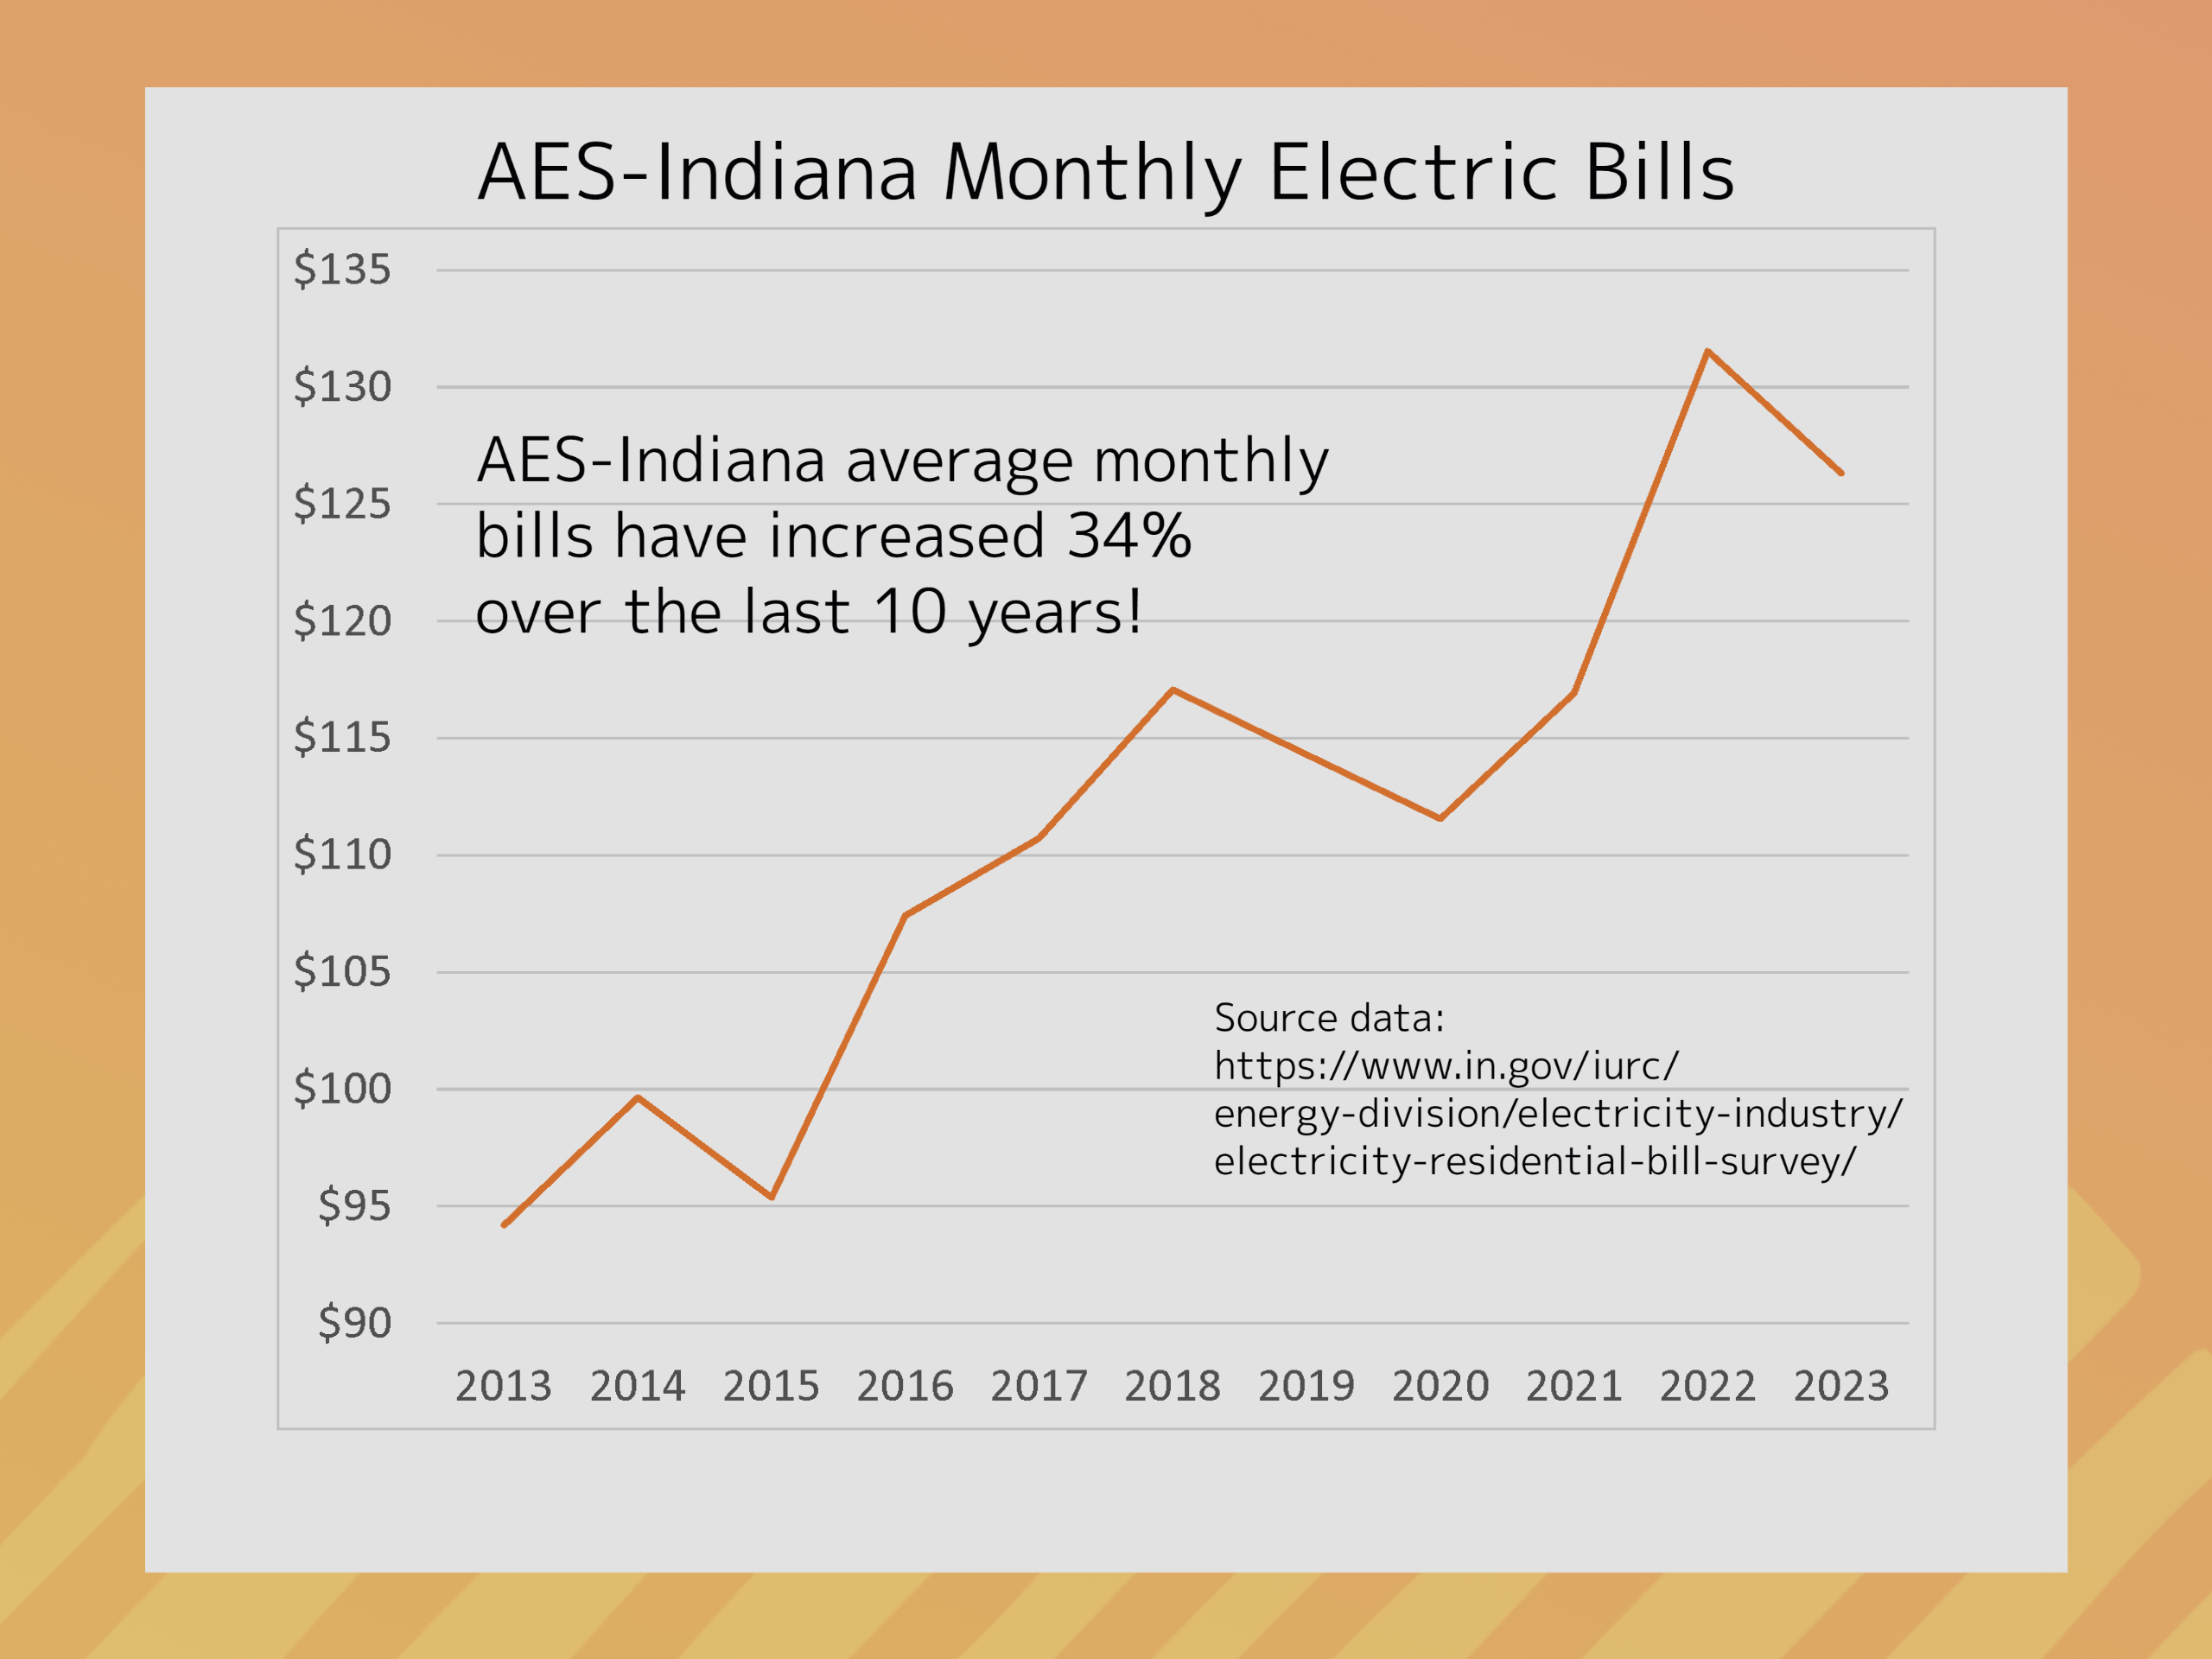 AES-Indiana monthly bills